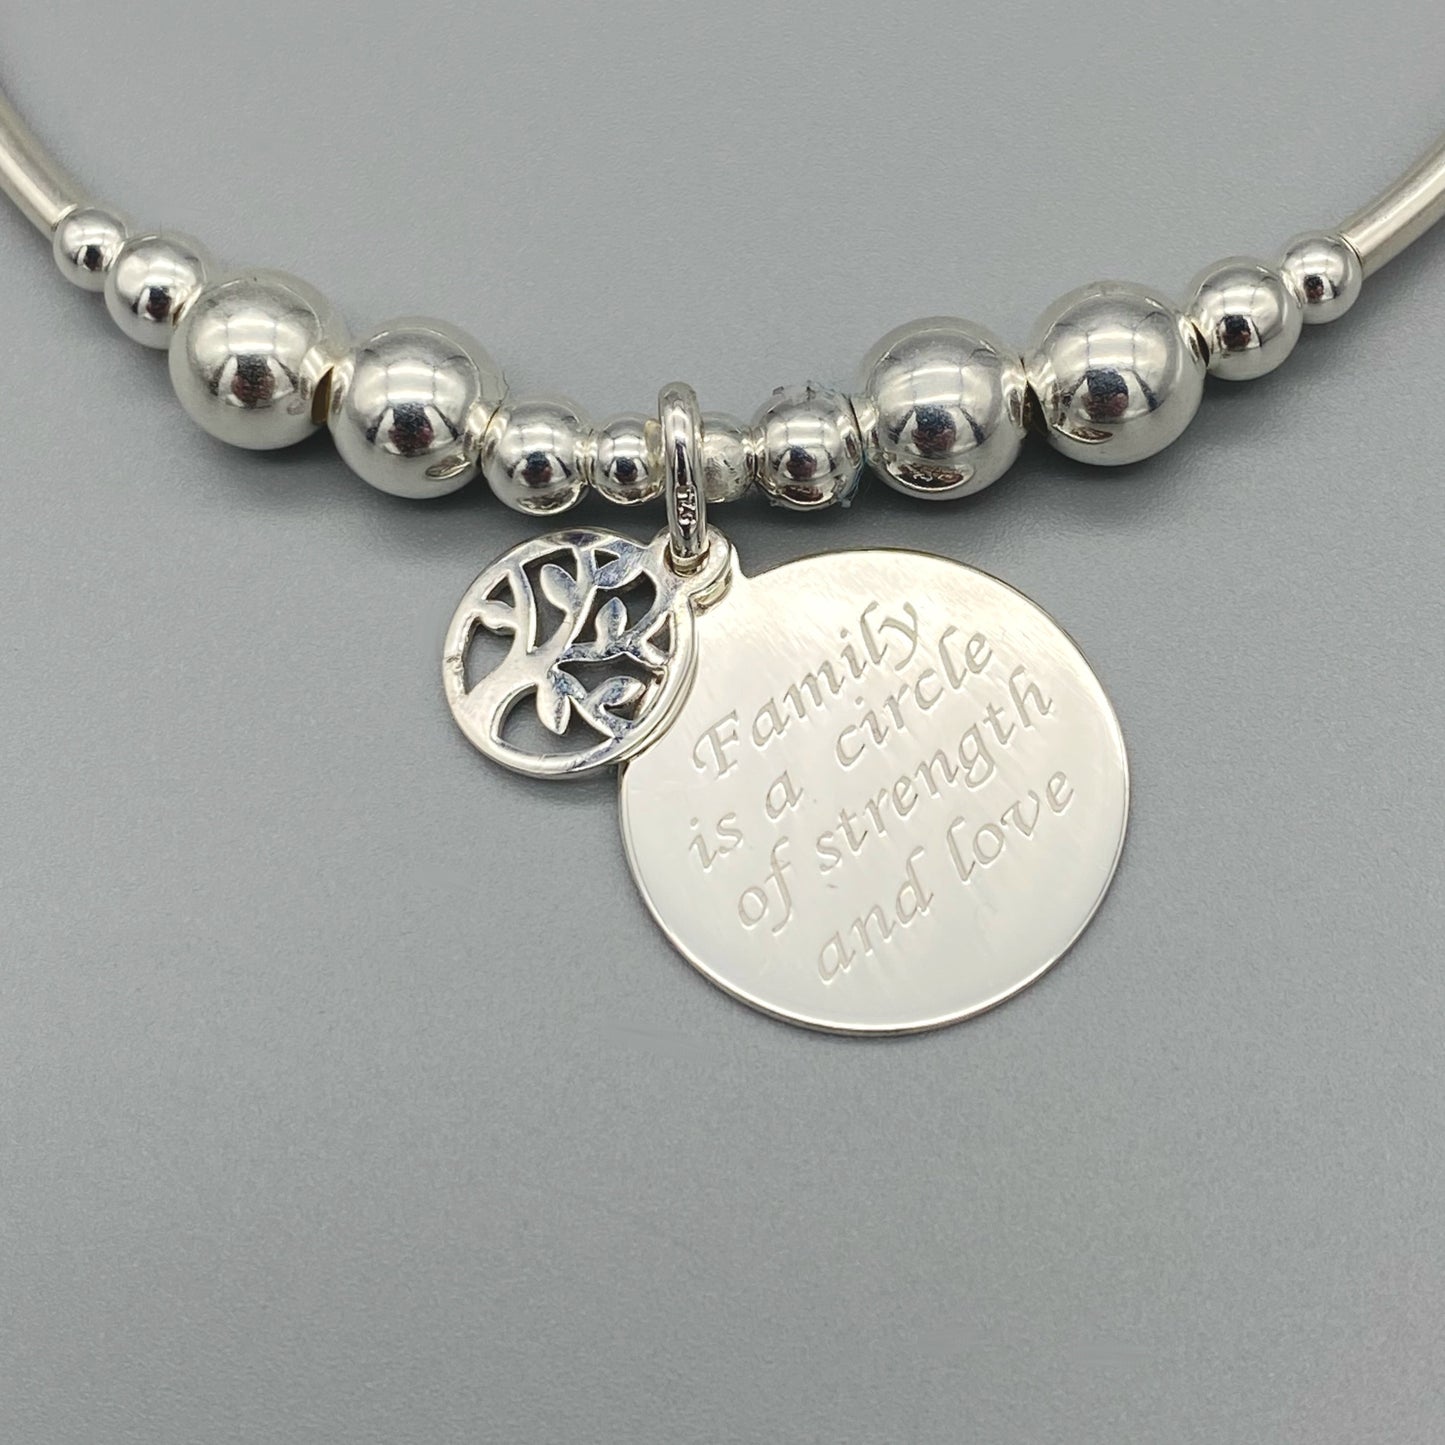 Closeup of "Family is a Circle of Strength & Love" charm sterling silver stacking bracelet for her by My Silver Wish